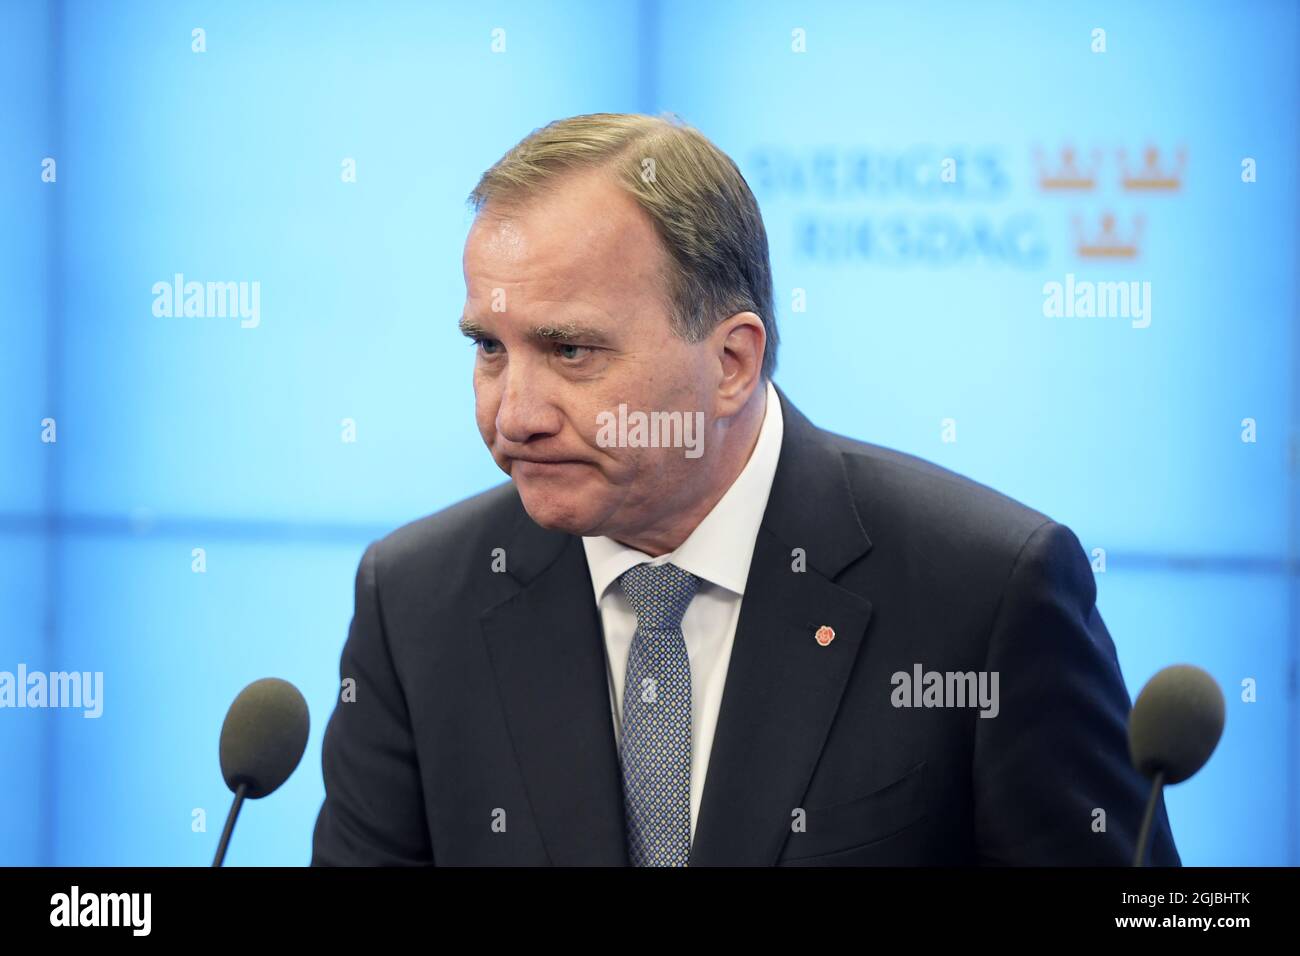 Swedish Prime Minister Stefan Lofven speaks to the press after he was ousted in no-confidence vote in the Swedish Parliament Riksdagen Tuesday 25 September. A total of 204 of Sweden's 349 members of parliament voted no to Lofven as prime minister. Photo: Anders Wiklund / TT kod 10040 Stock Photo